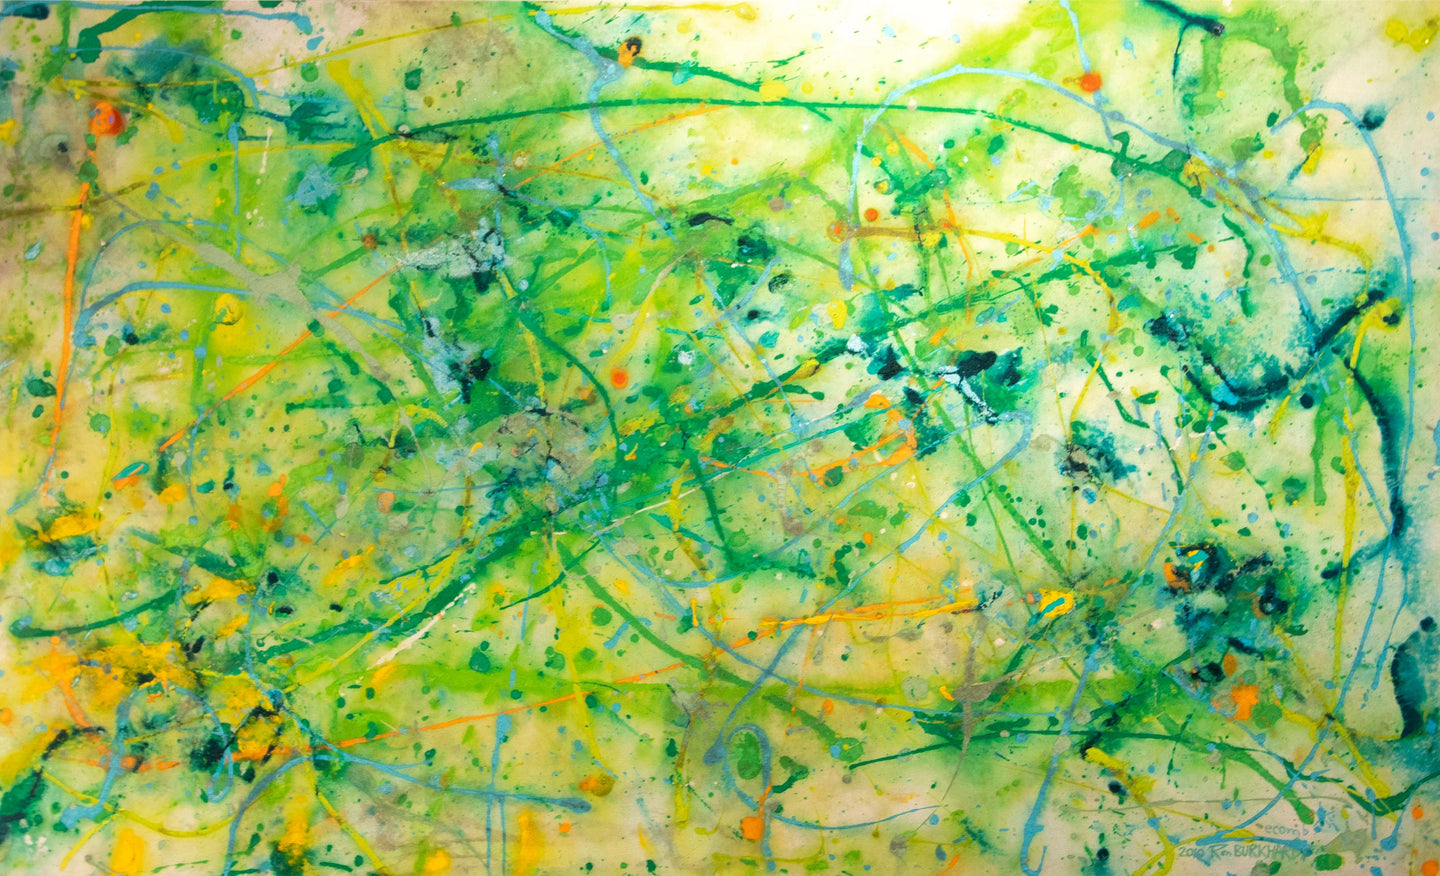 Symphony in Lime Green, 2010